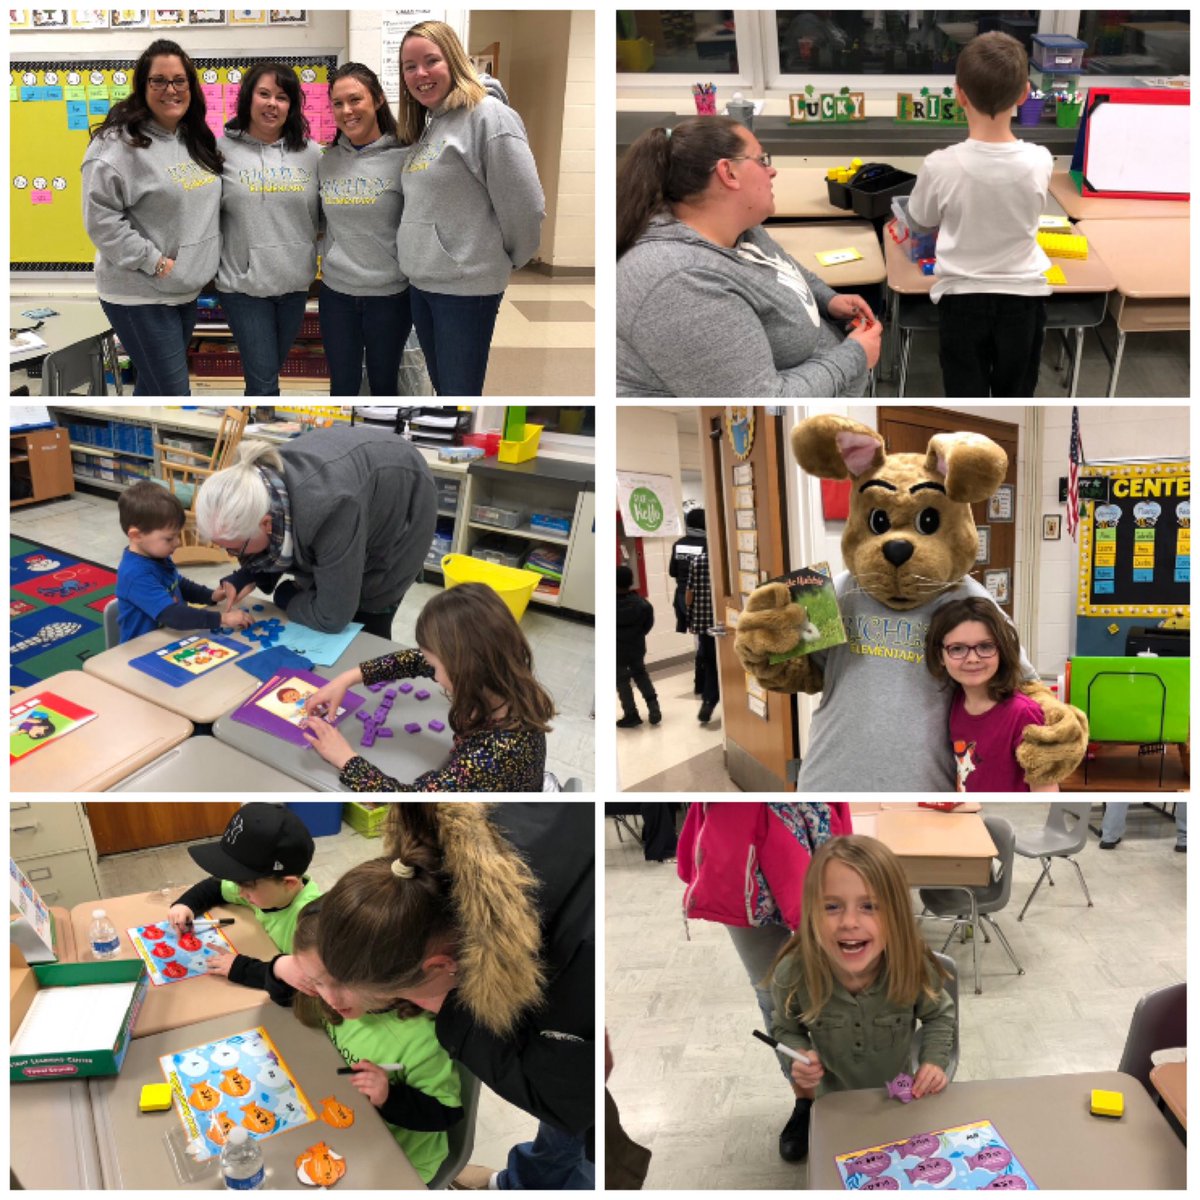 What a great turnout for Literacy Night ~ thank you to all the families that joined us!! #Ilovetoreadmonth #literacynight #RicheyProud #firstgradeteacher #readingisfun